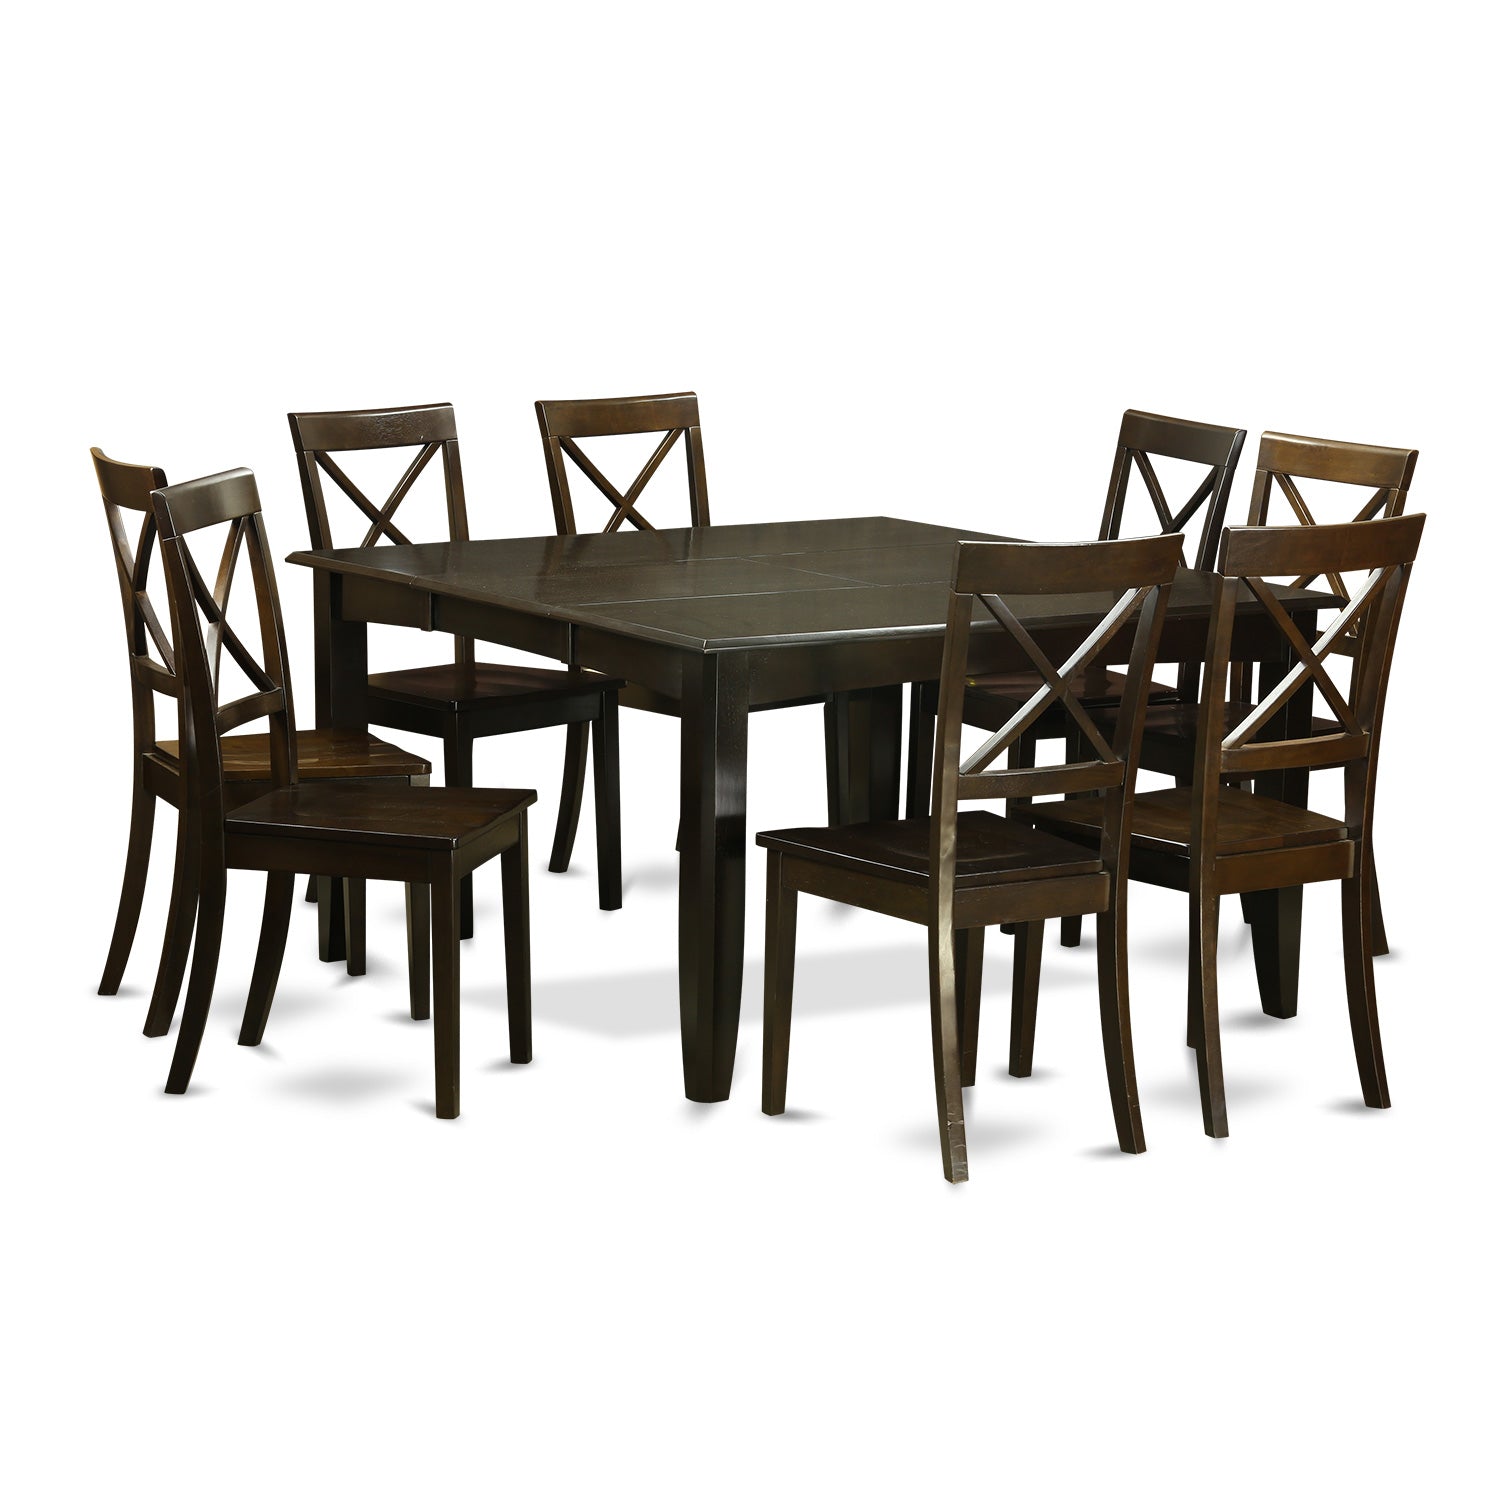 9 Pc Dining Room Kitchen Table w/ Leaf and 8 Dinette Chairs In Cappuccino